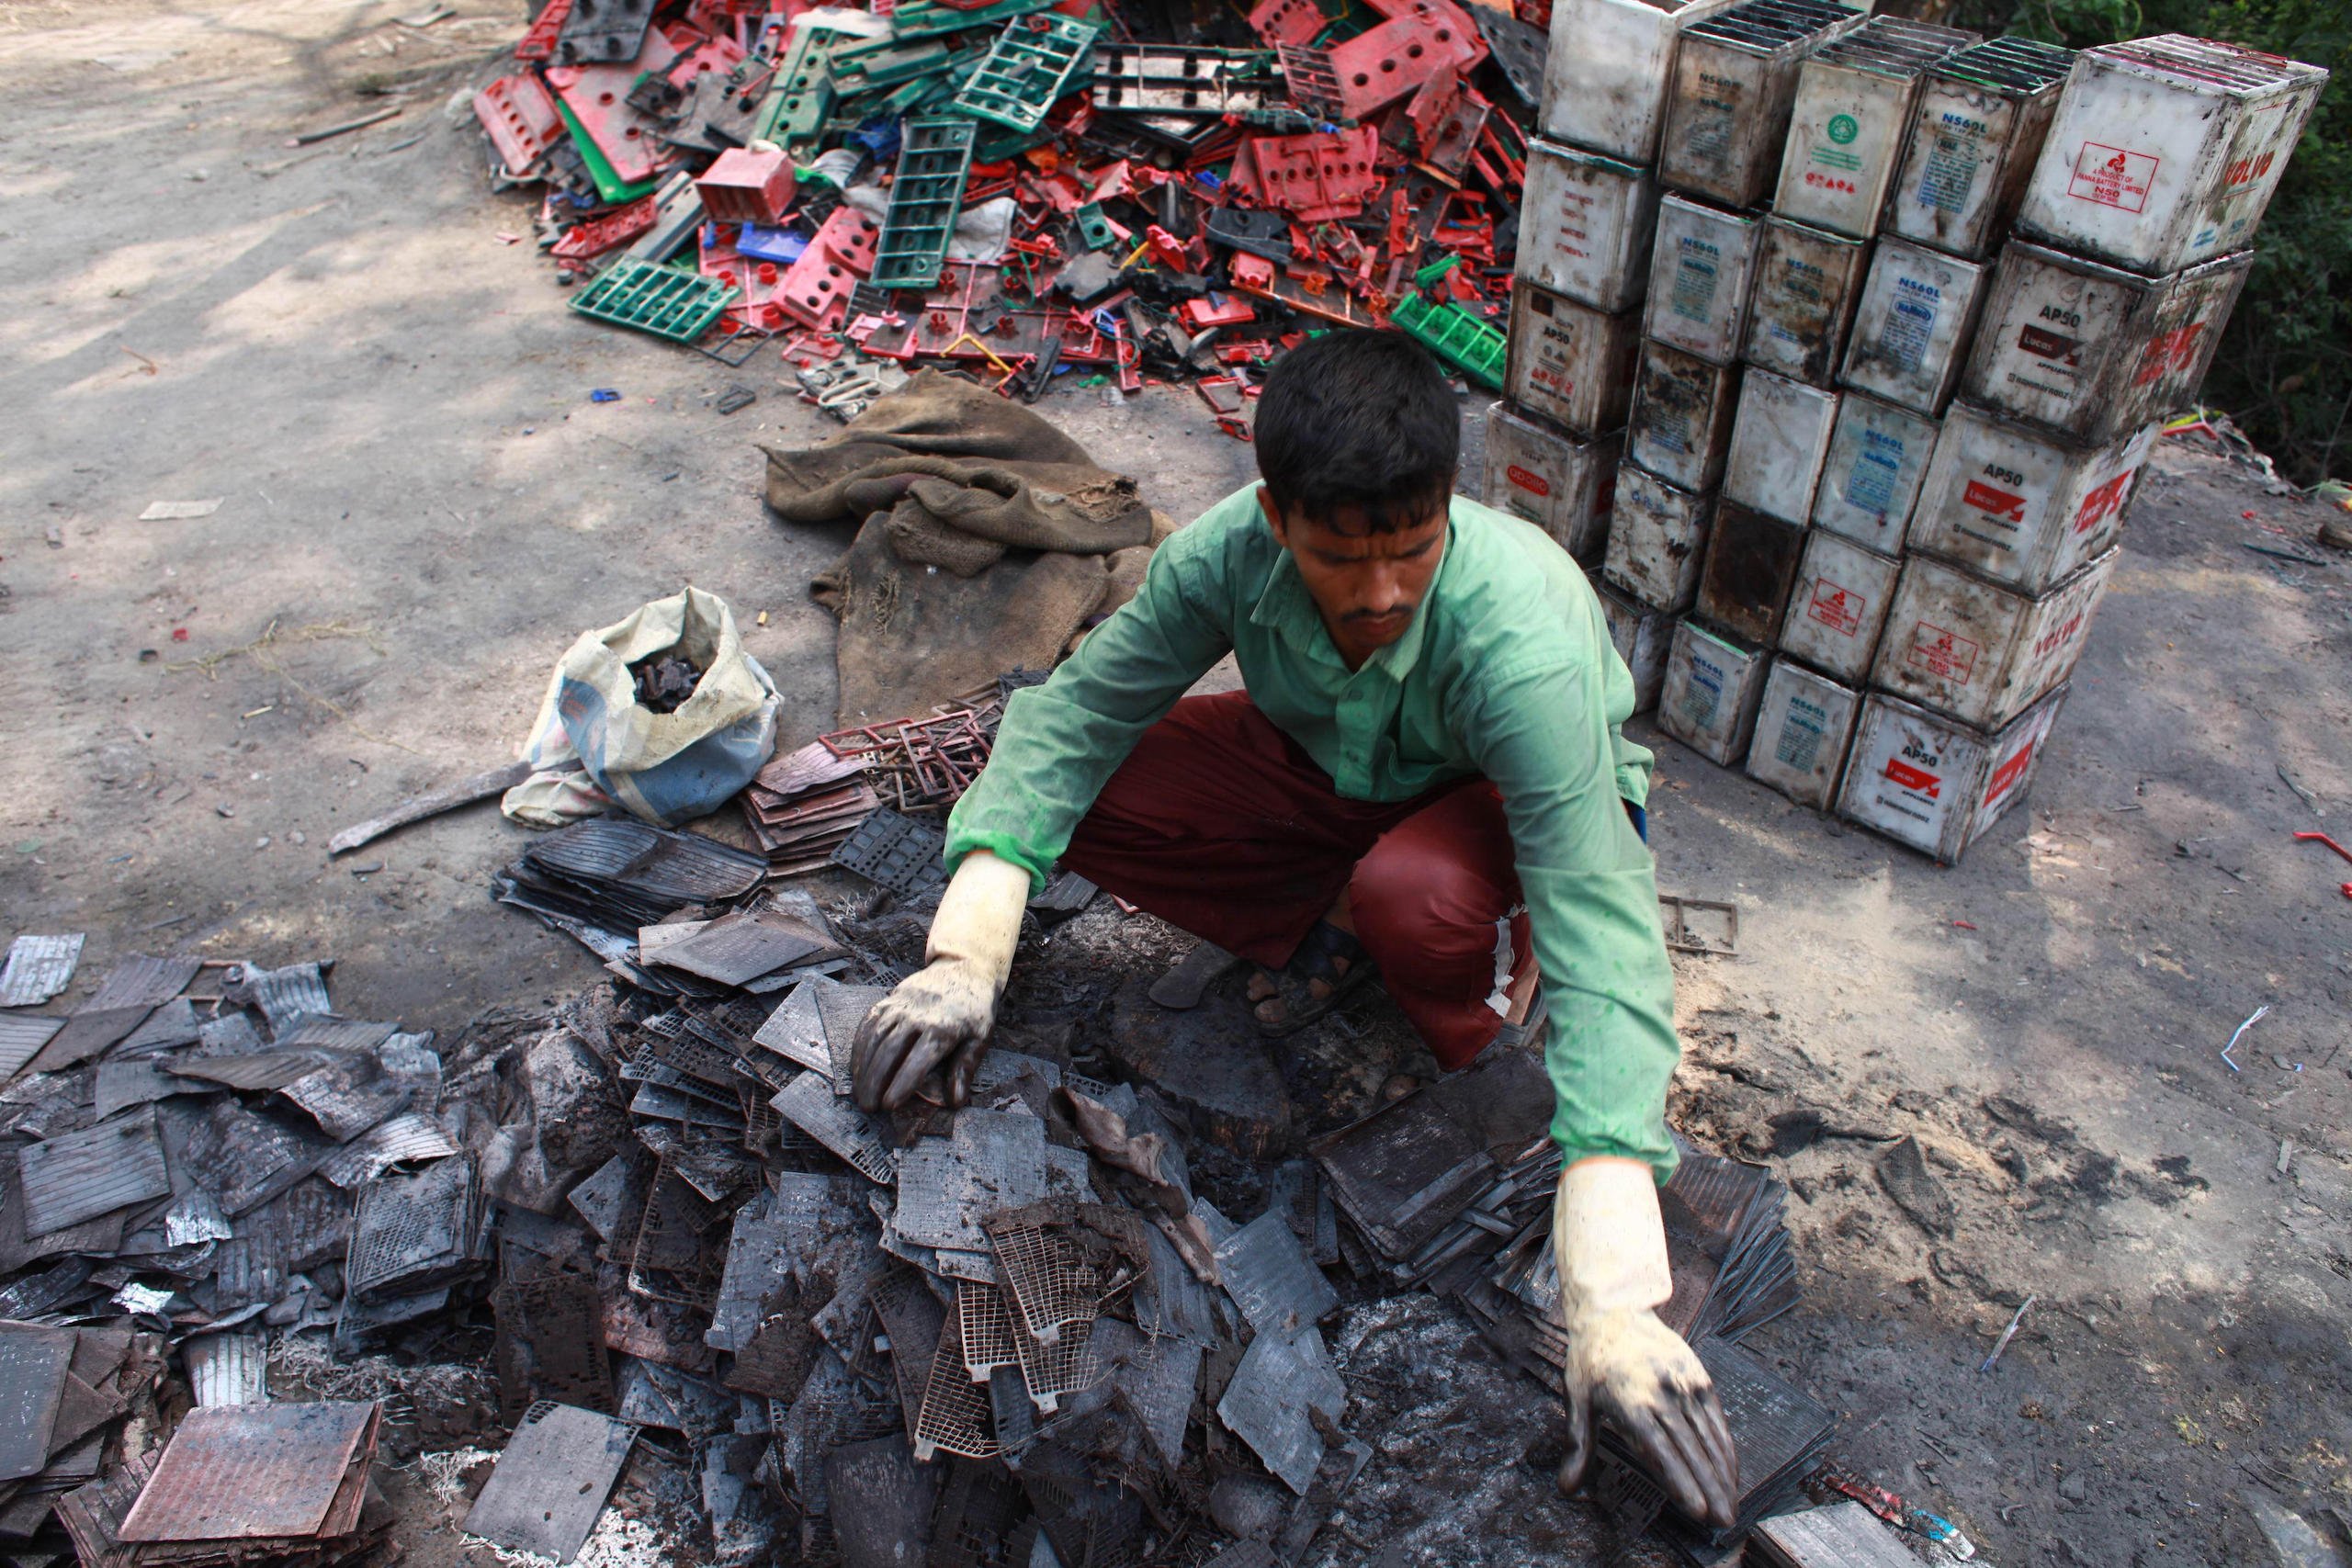 <p>Batteries are recycled in Dhaka, Bangladesh. There are only six formally registered battery recyclers in the country, which means the majority of batteries are processed by informal units. (Image: zakir hossain chowdhury zakir / Alamy)</p>